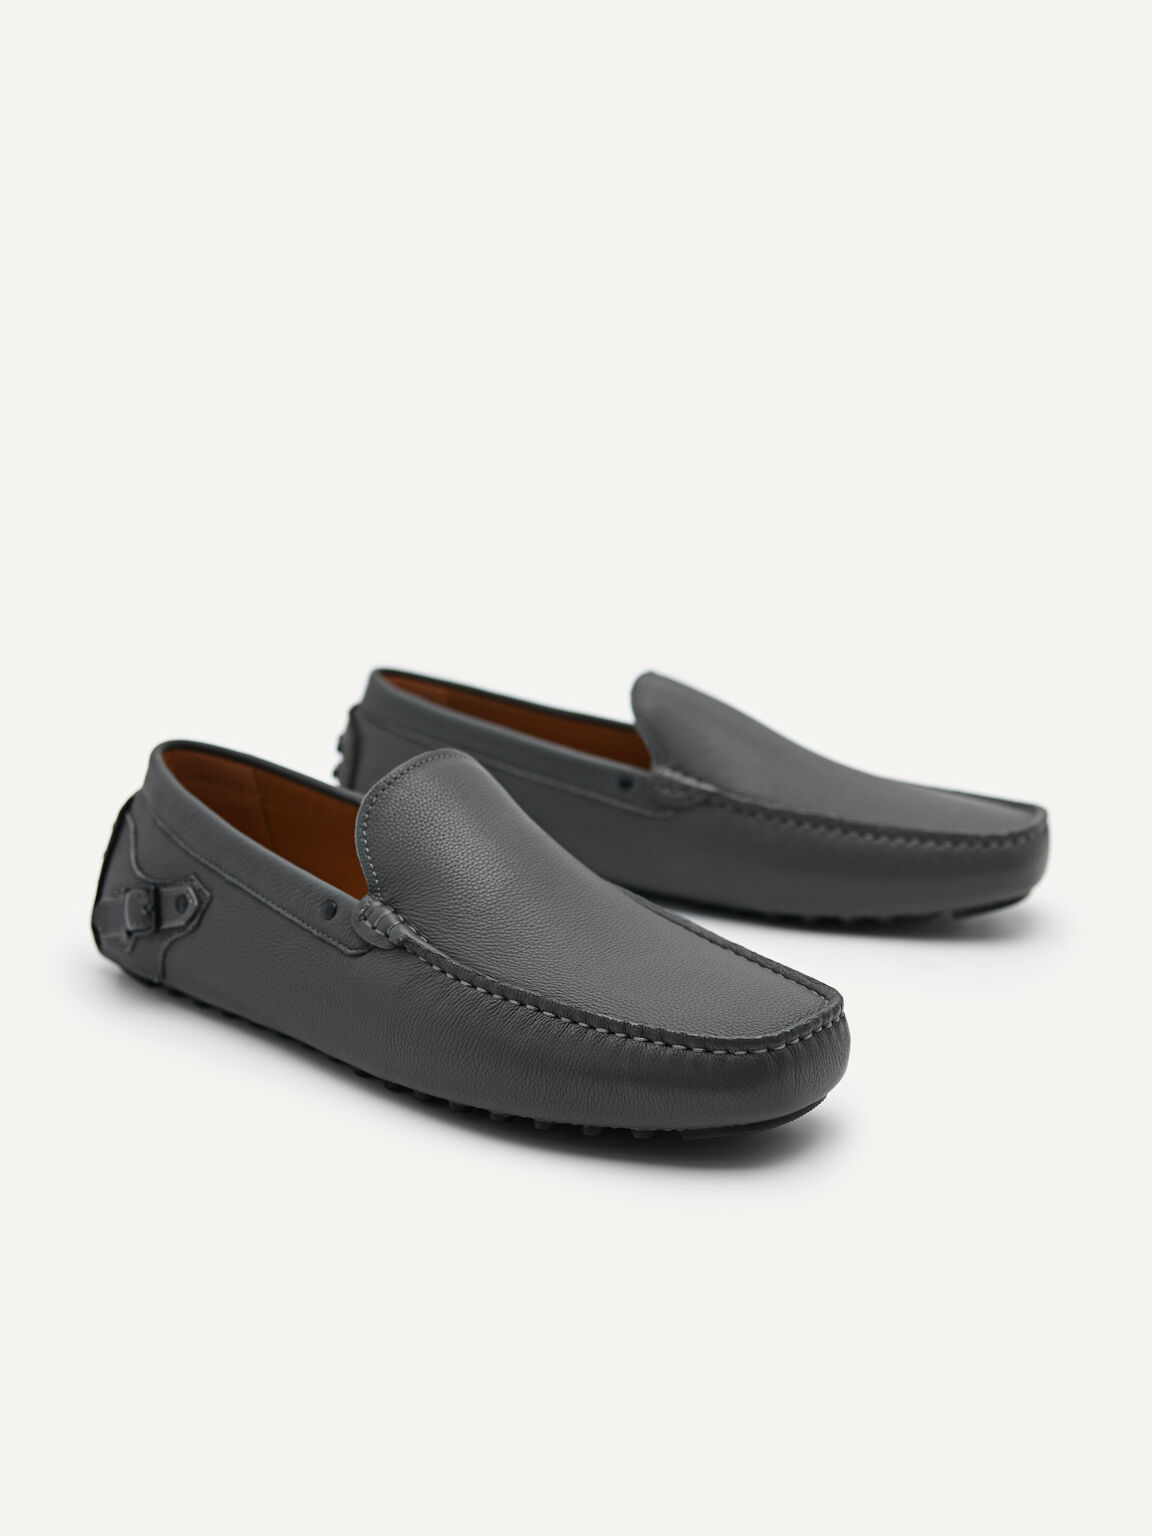 Leather Driving Moccassins with Side Buckle, Dark Grey